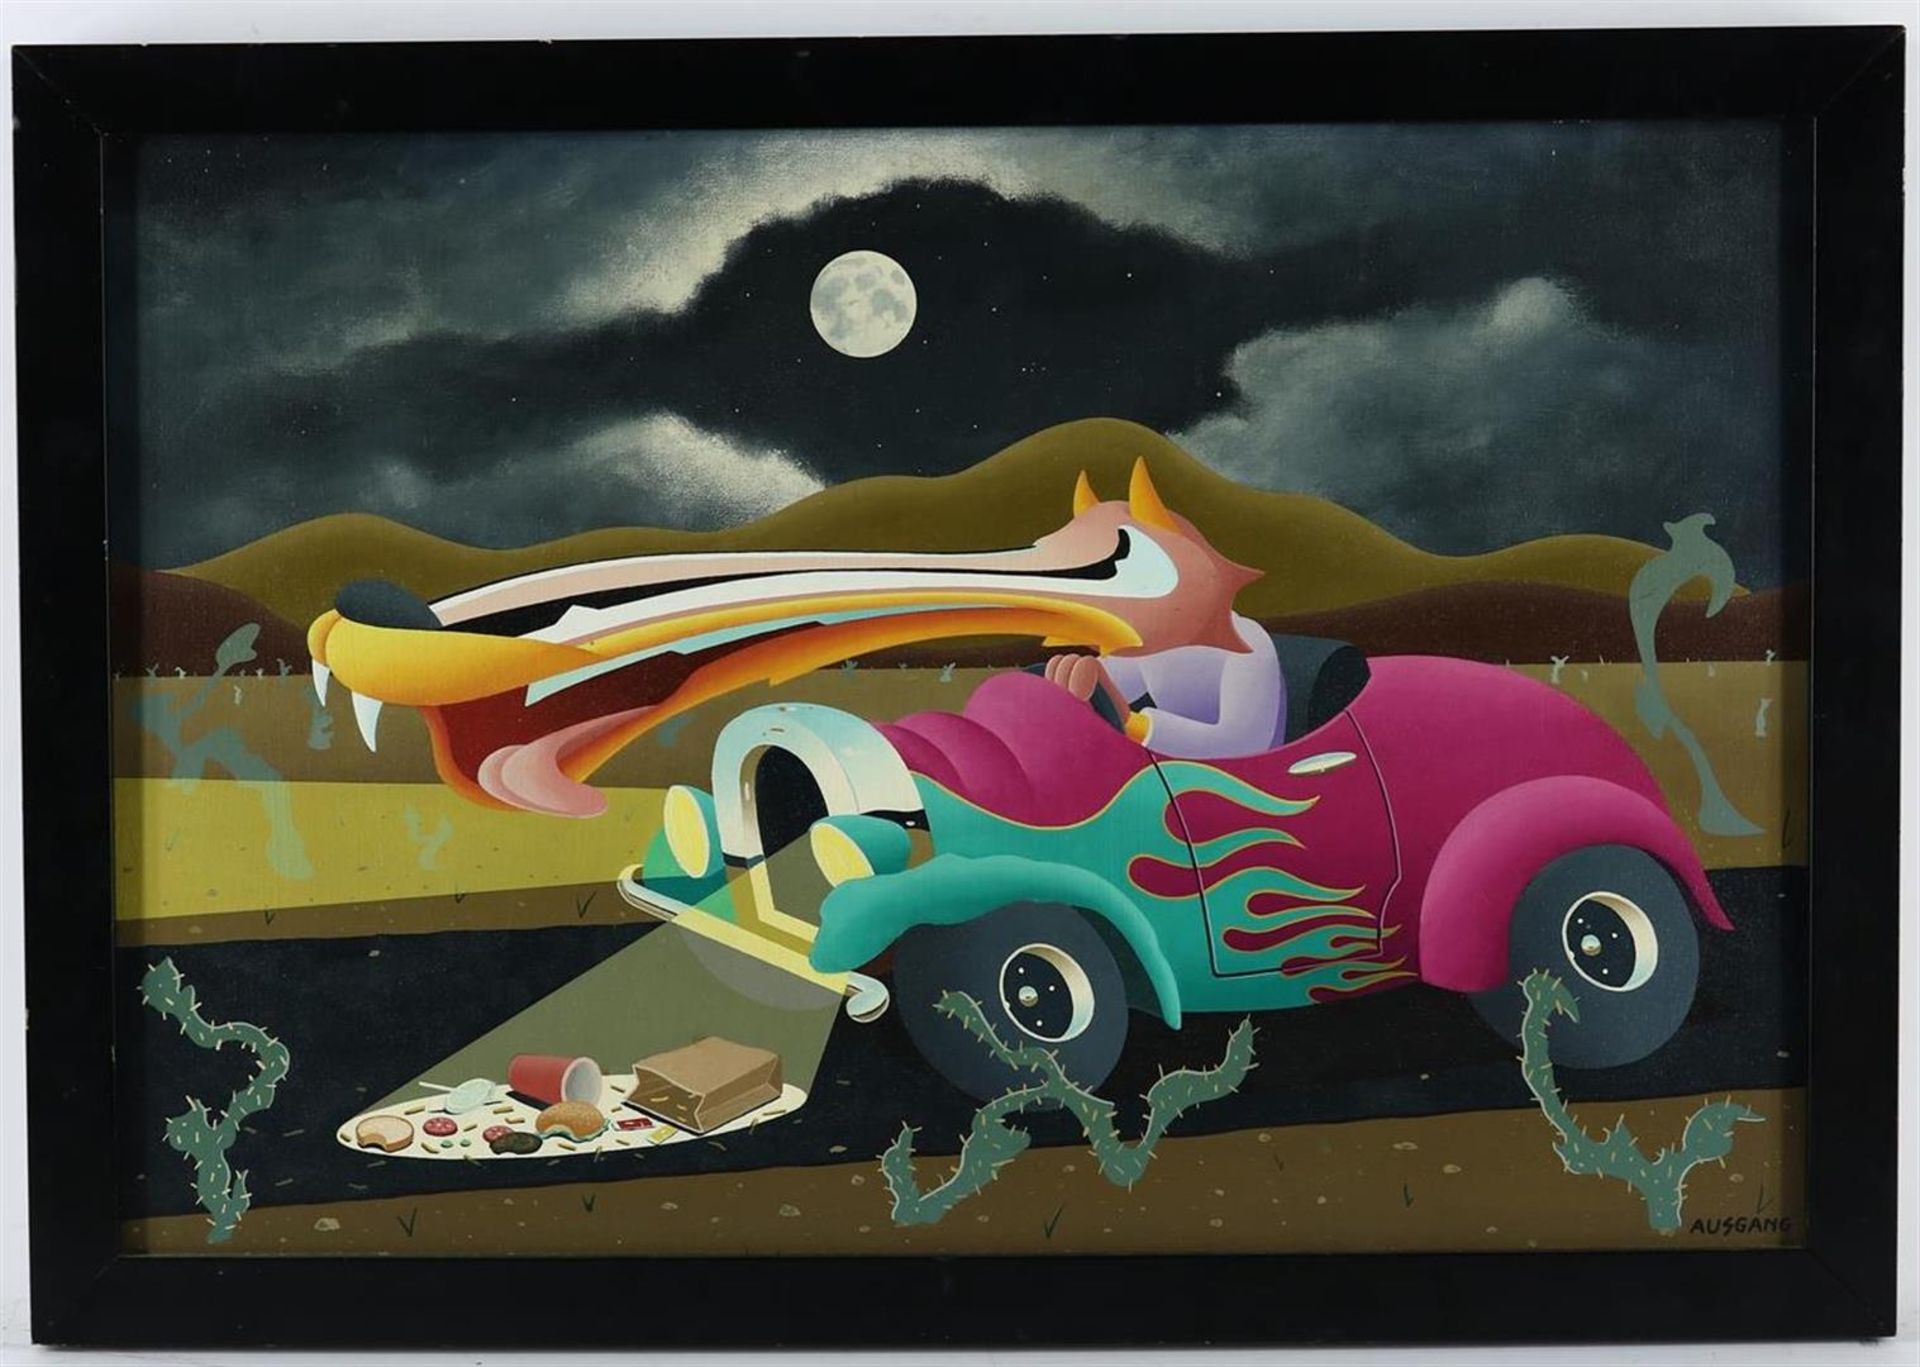 Anthony Ausgang (1959-) "Hamburger highway: Fast food and fast cars", signed bottom right and - Image 2 of 4